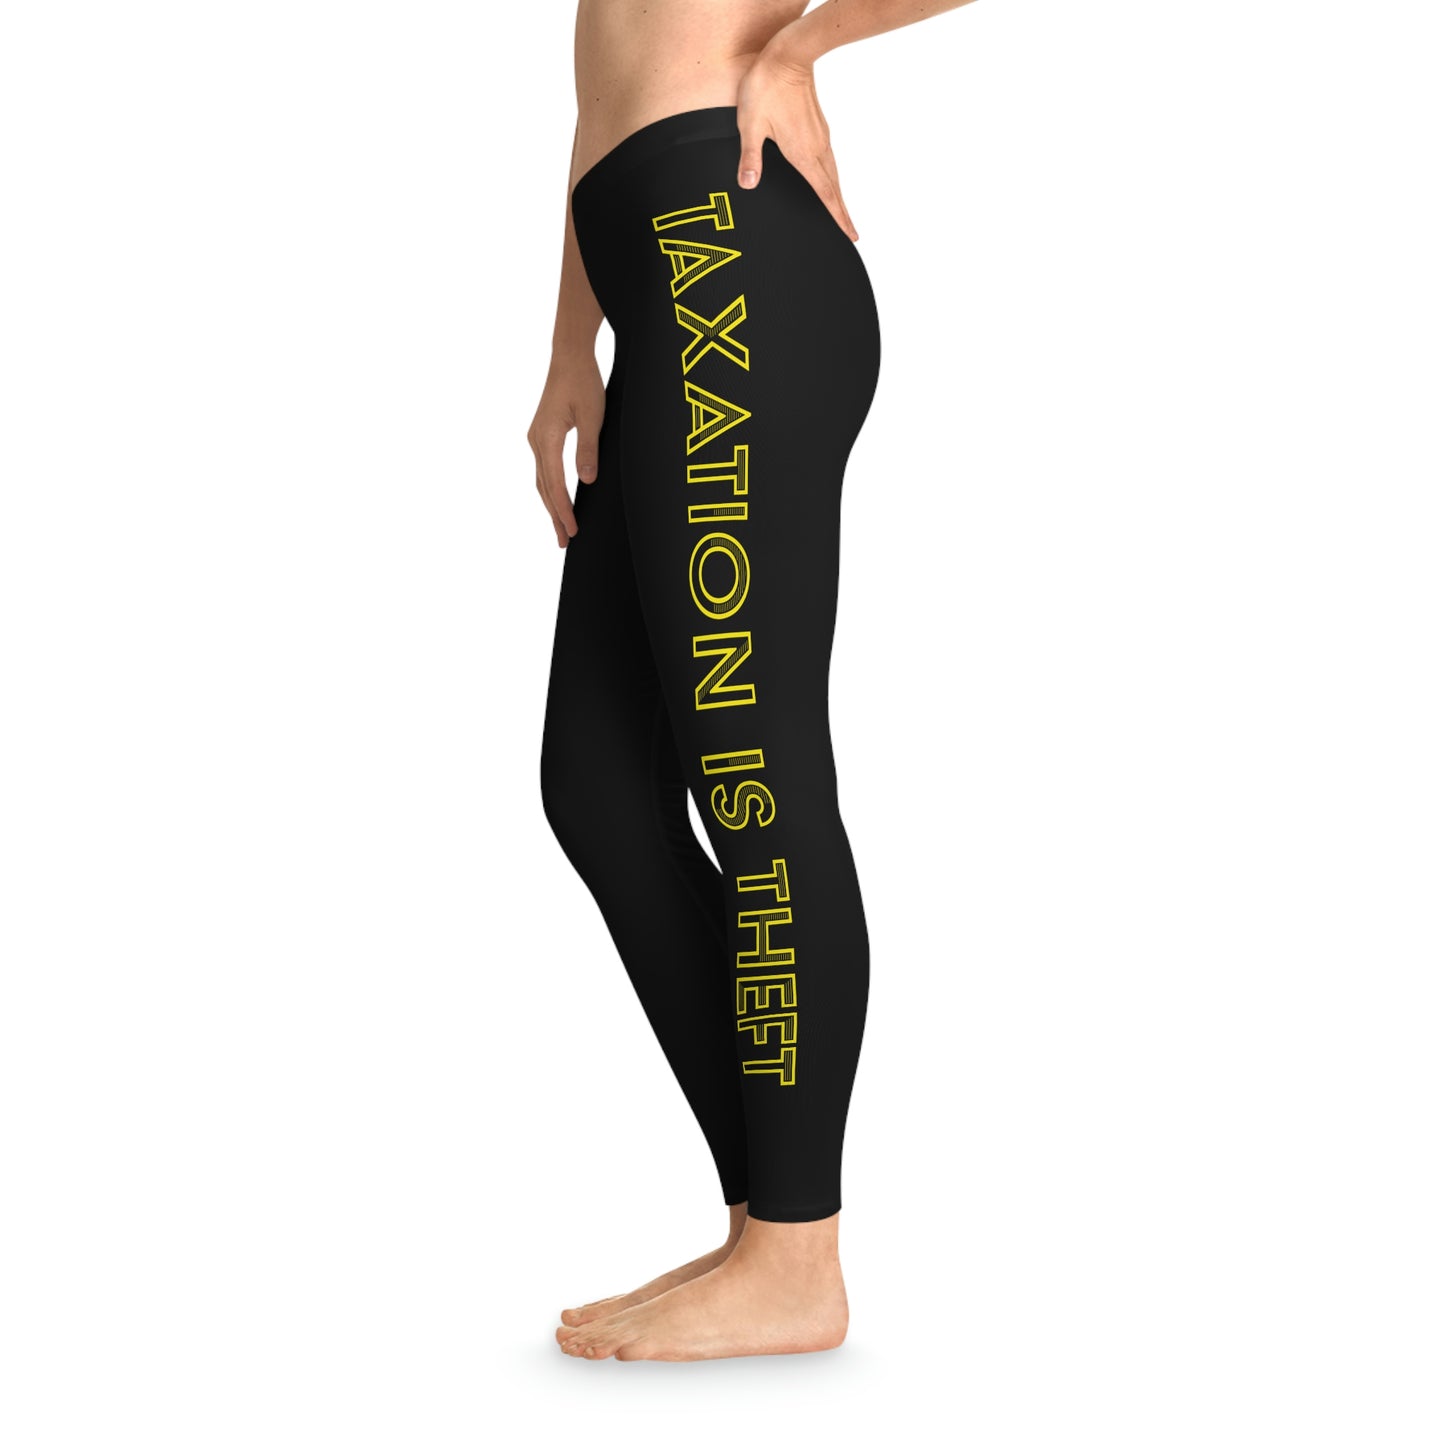 Taxation is Theft Stretchy Leggings